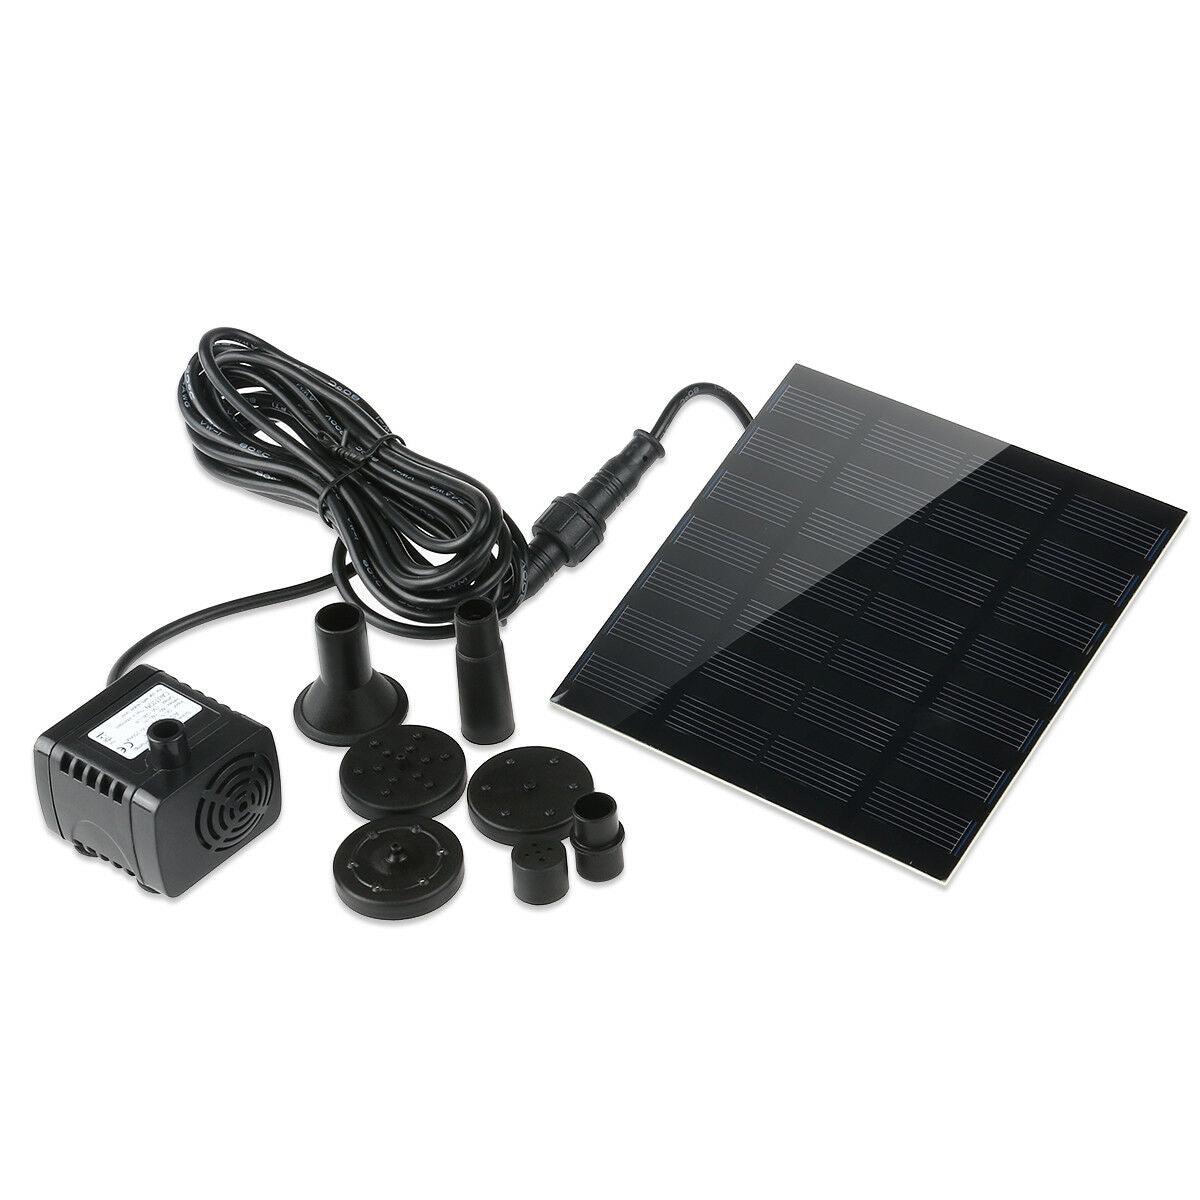 Solar Powered Water Pump For Fountains, Bird Baths, Submersible. - Office Catch